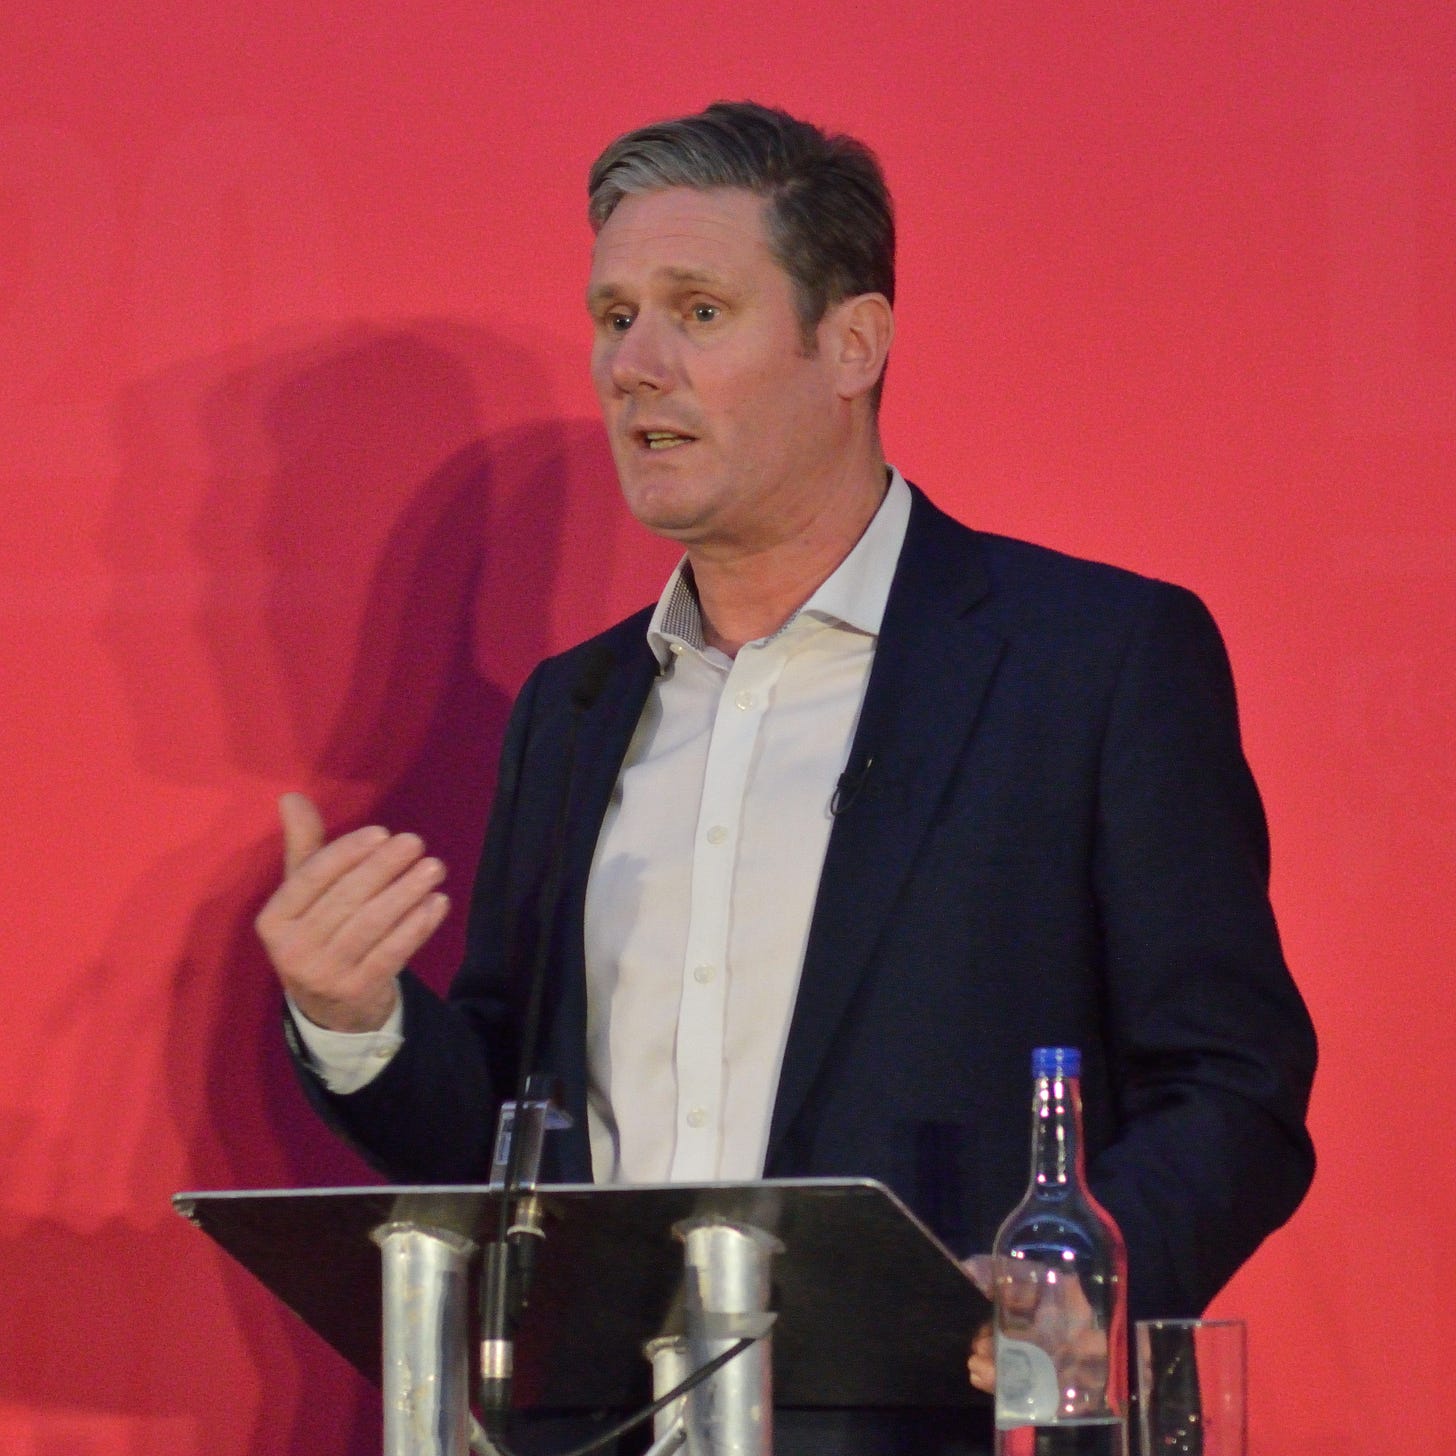 File:Keir Starmer, 2020 Labour Party leadership election hustings, Bristol  3.jpg - Wikimedia Commons